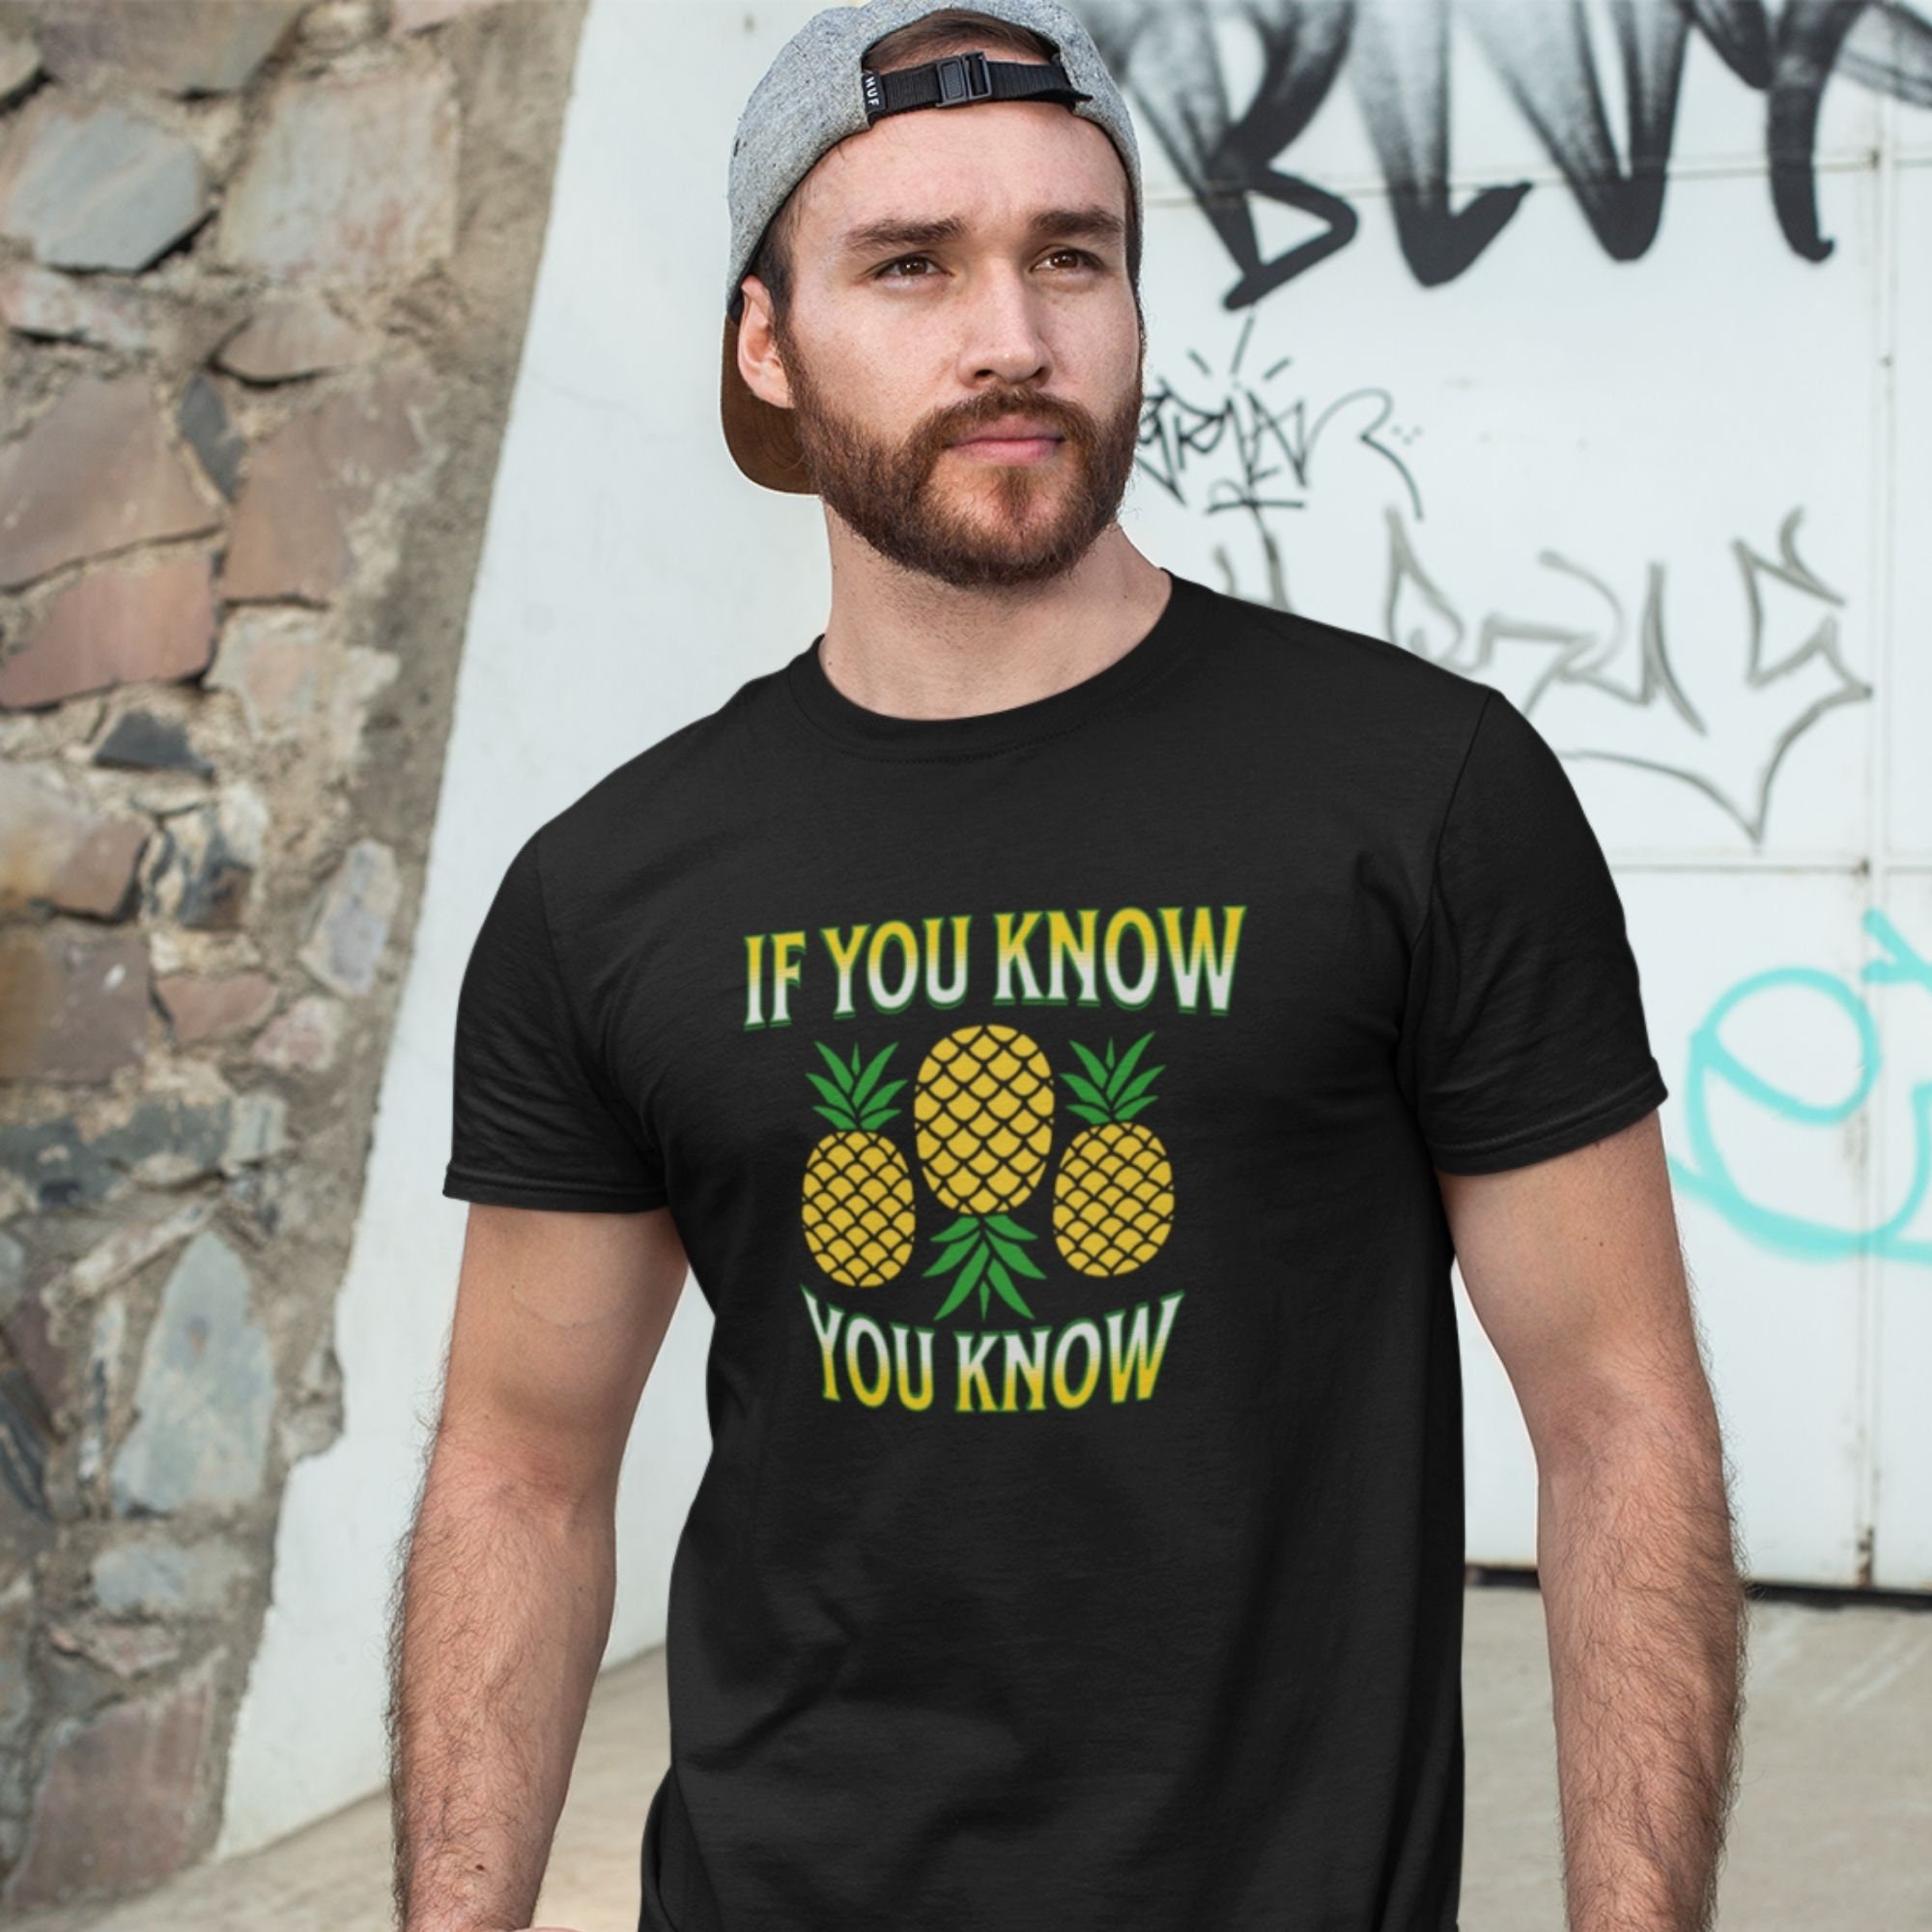 Swingers Pineapple Shirt If You Know You Know Pineapple photo